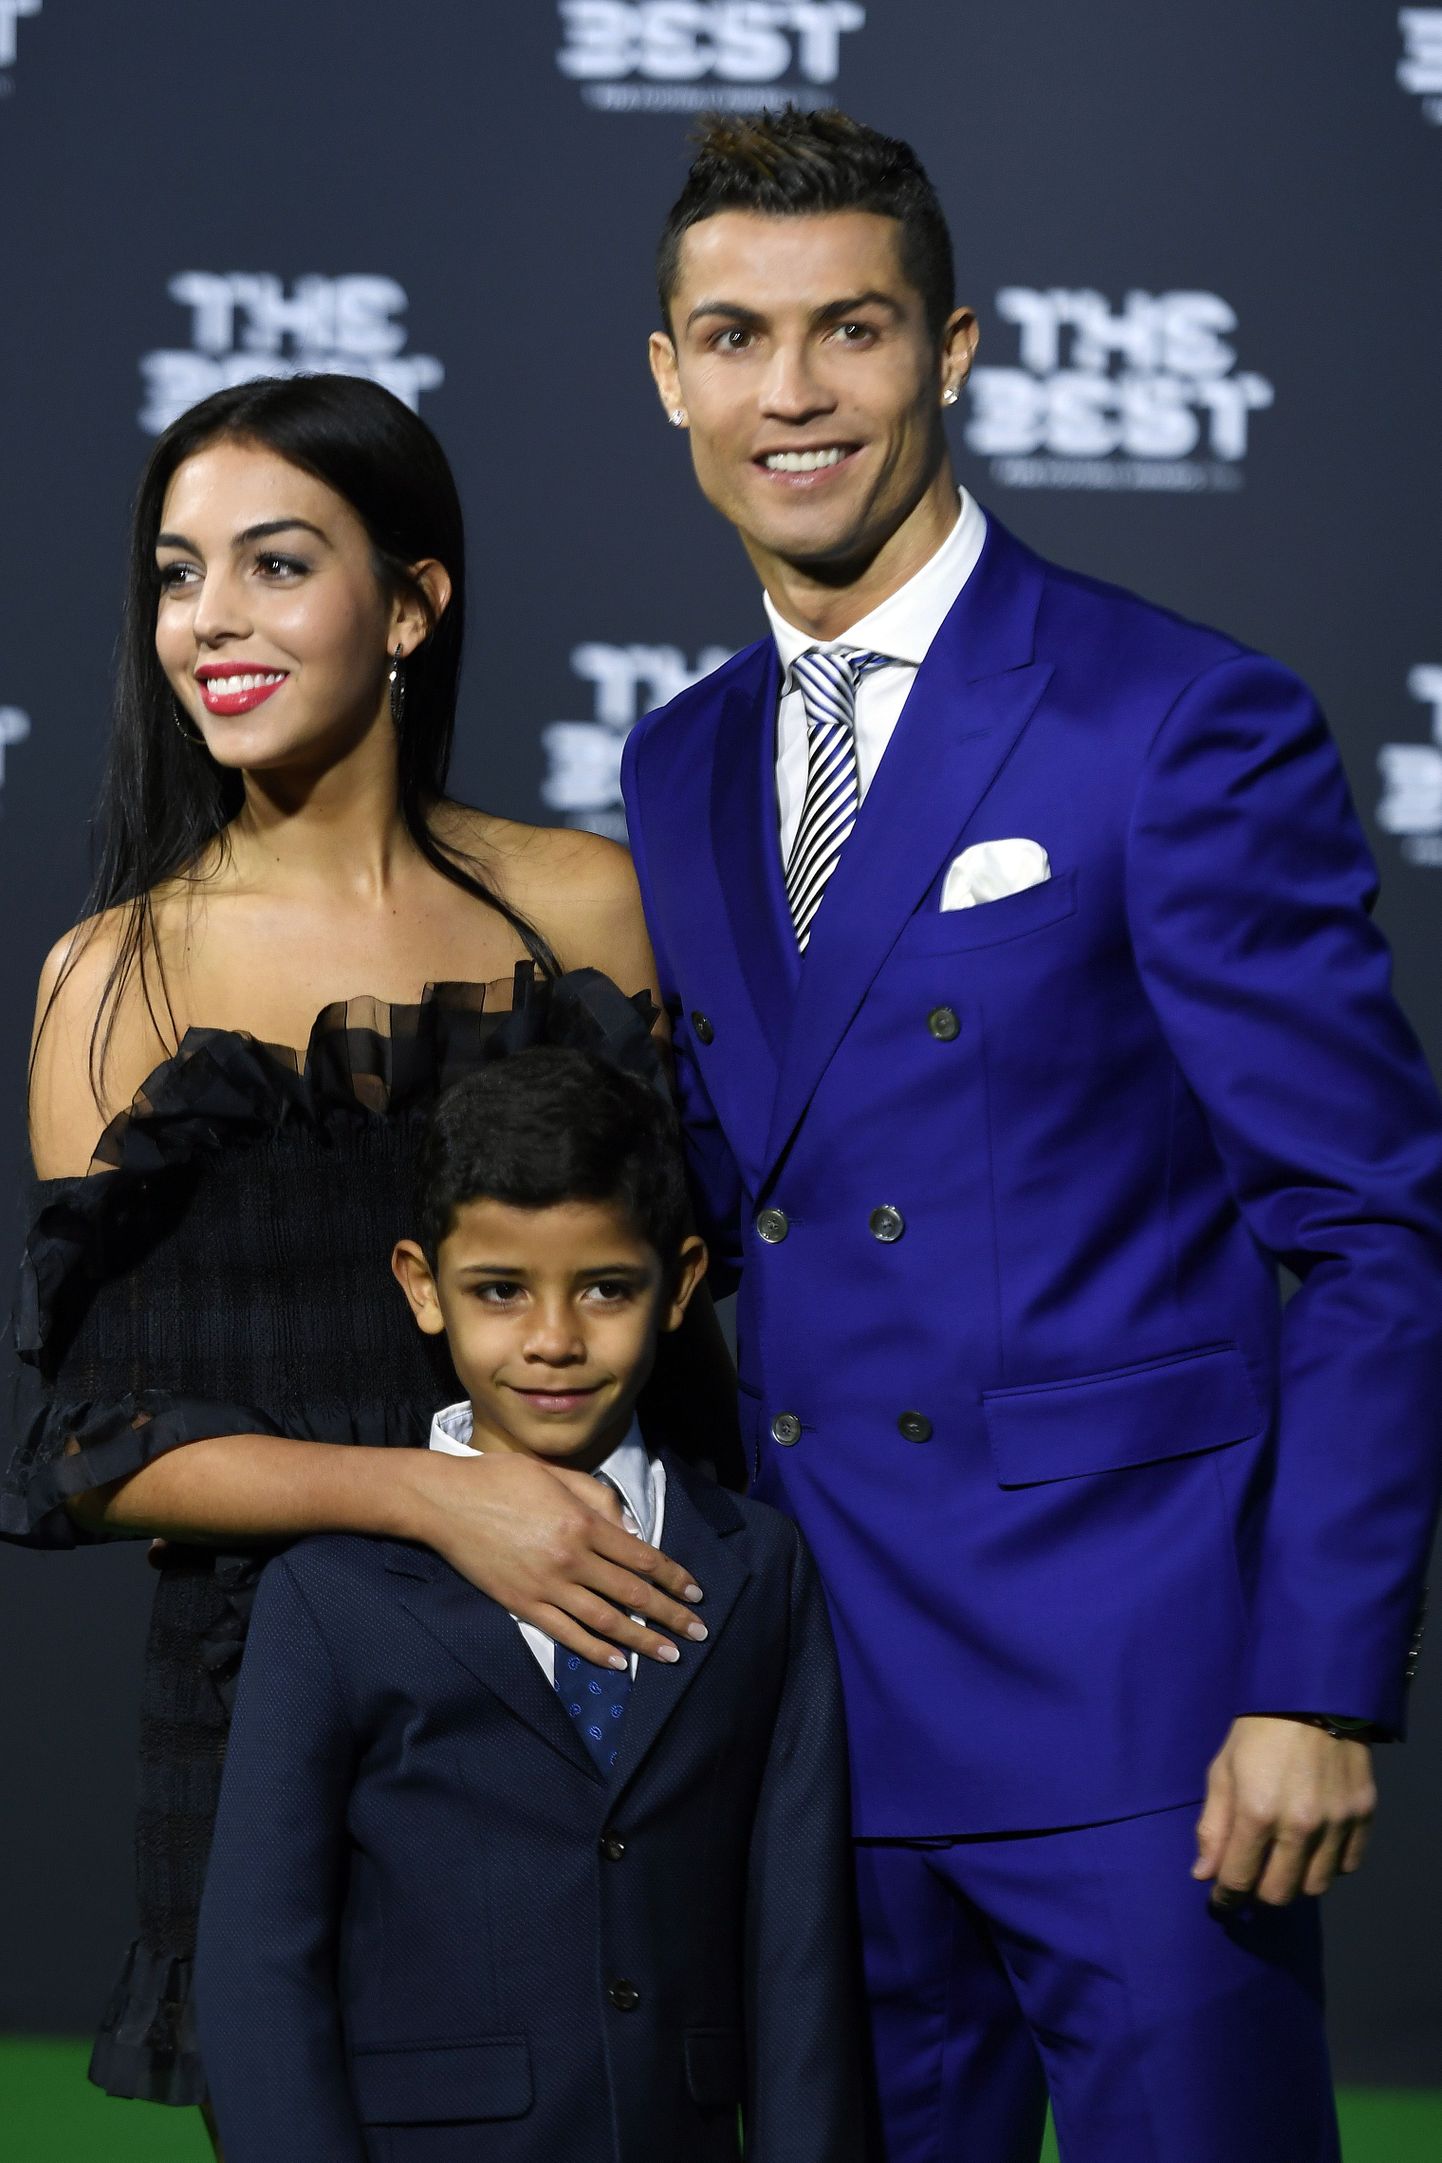 Portugal's soccer player Cristiano Ronaldo, right, his girlfriend Georgina Rodriguez, left, and his son Ronaldo jr., center, arrive on the green carpet prior during the The Best FIFA Football Awards 2016 ceremony held at the Swiss TV studio in Zurich, Switzerland, Monday, Jan. 9, 2017. (Walter Bieri/Keystone via AP)